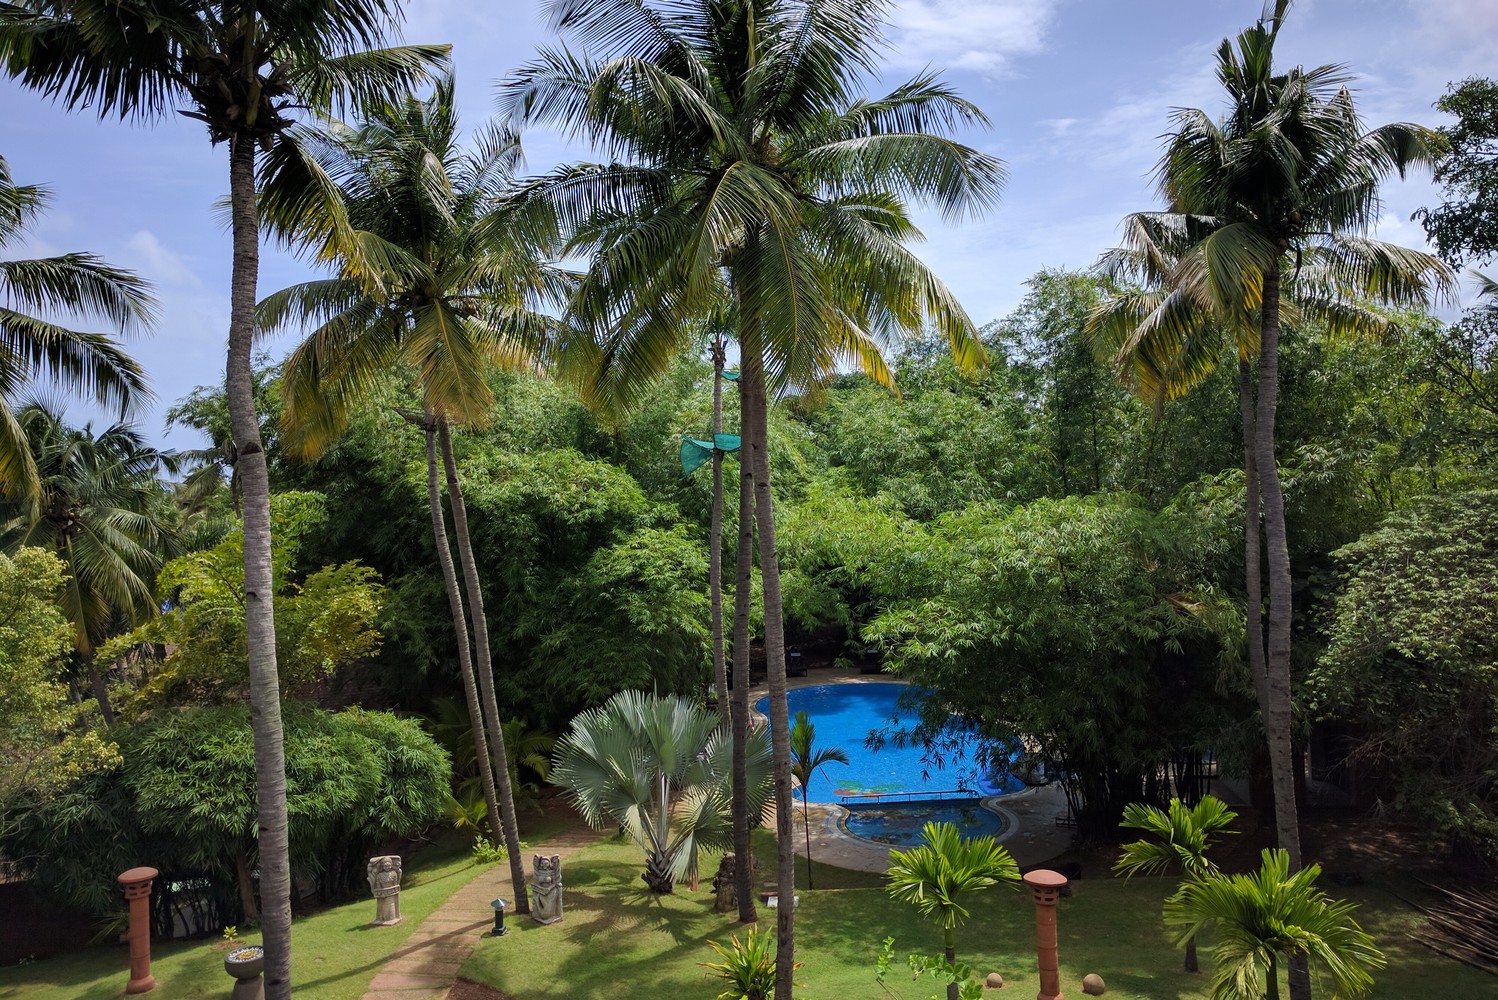 A resort with a swimming pool surrounded by coconut palm trees and other trees